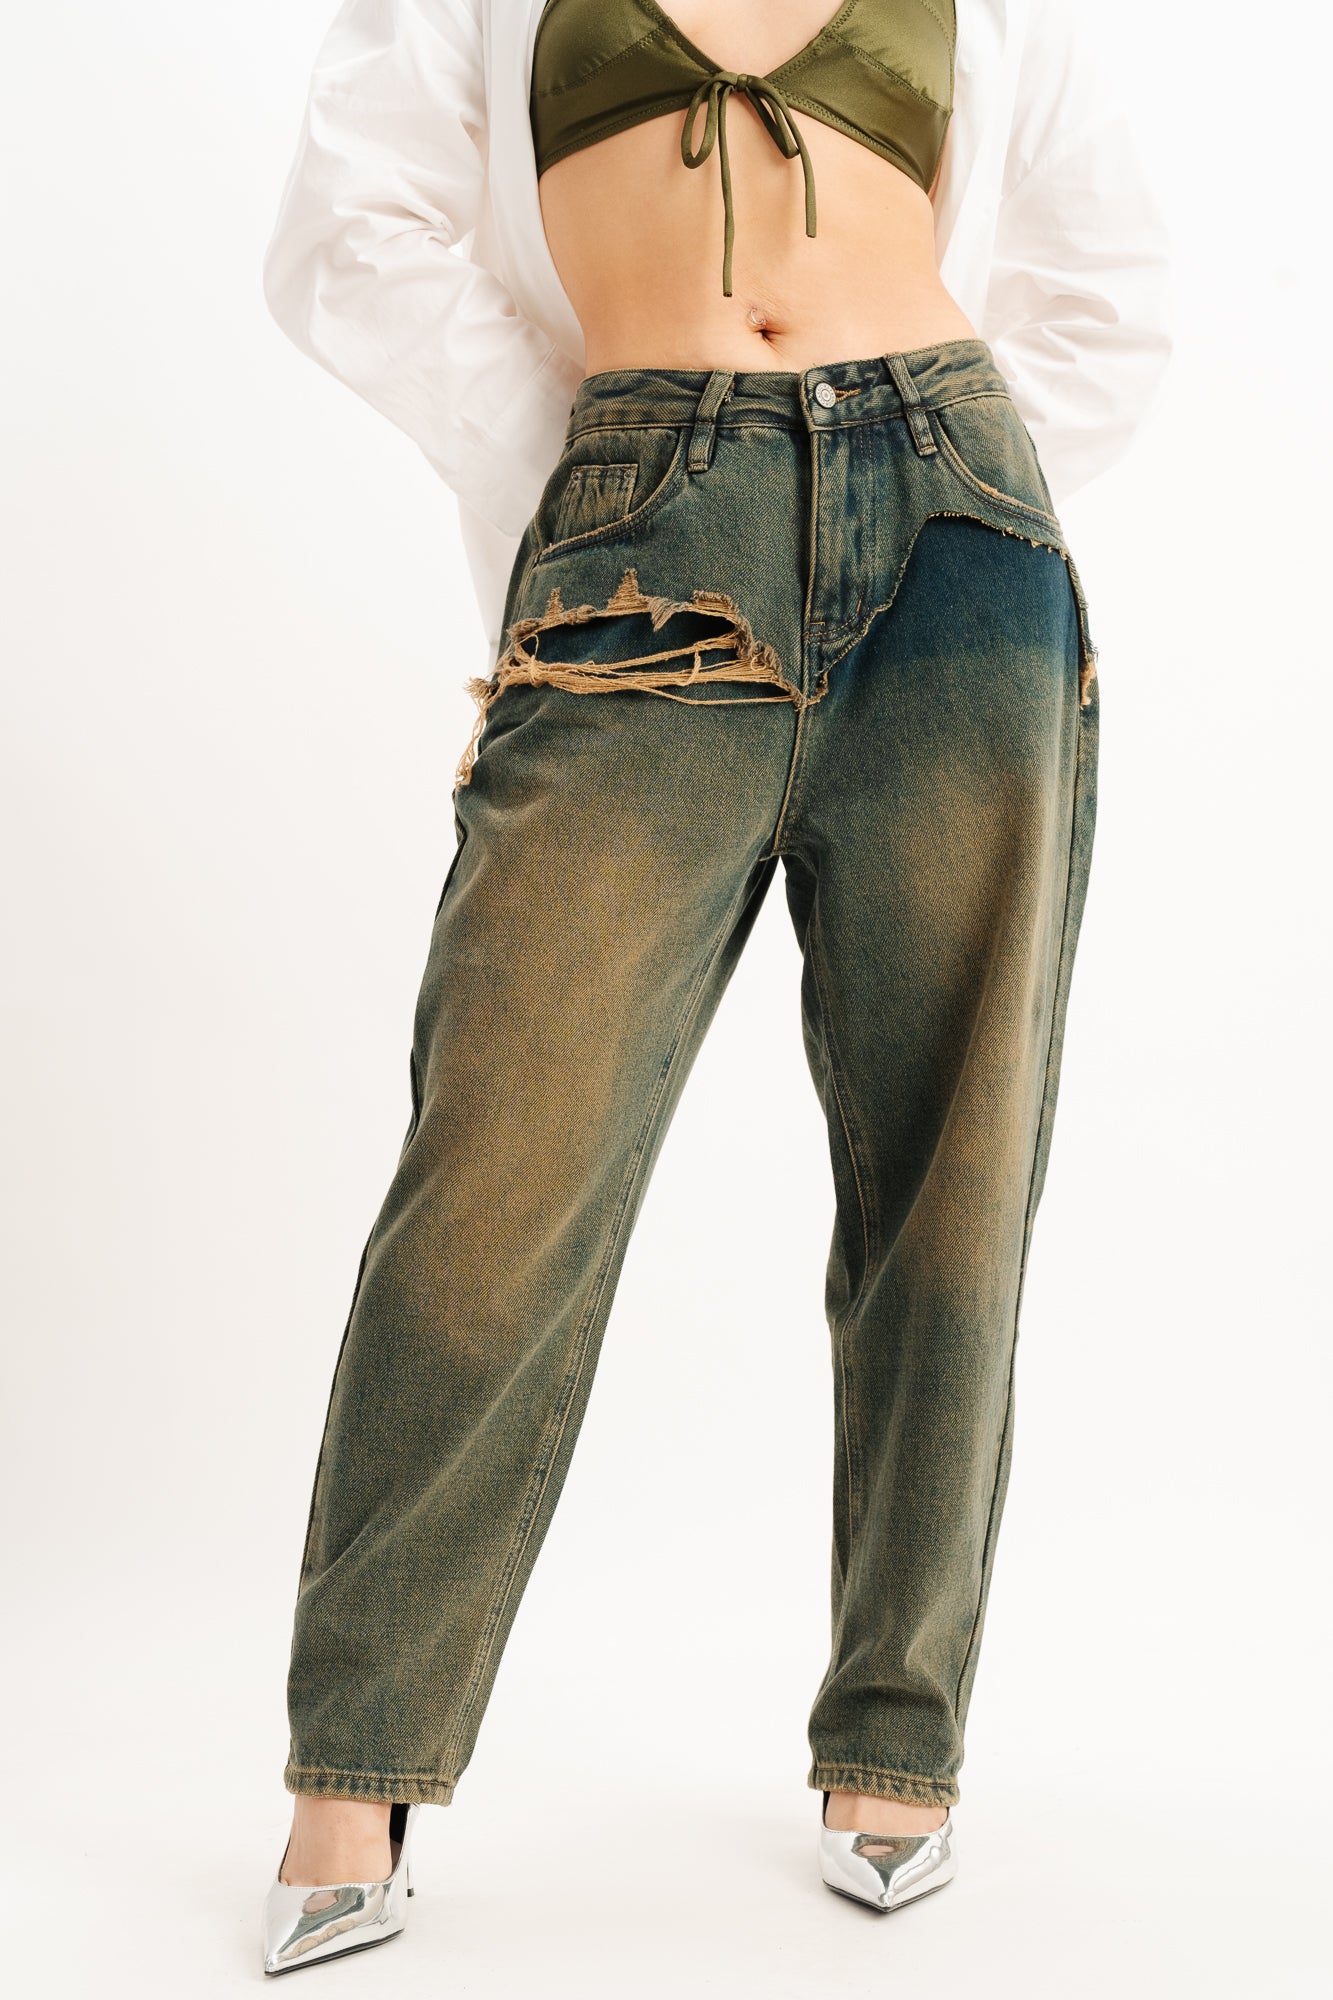 Jeans & Trousers | Parrot Green denim jeans | Freeup